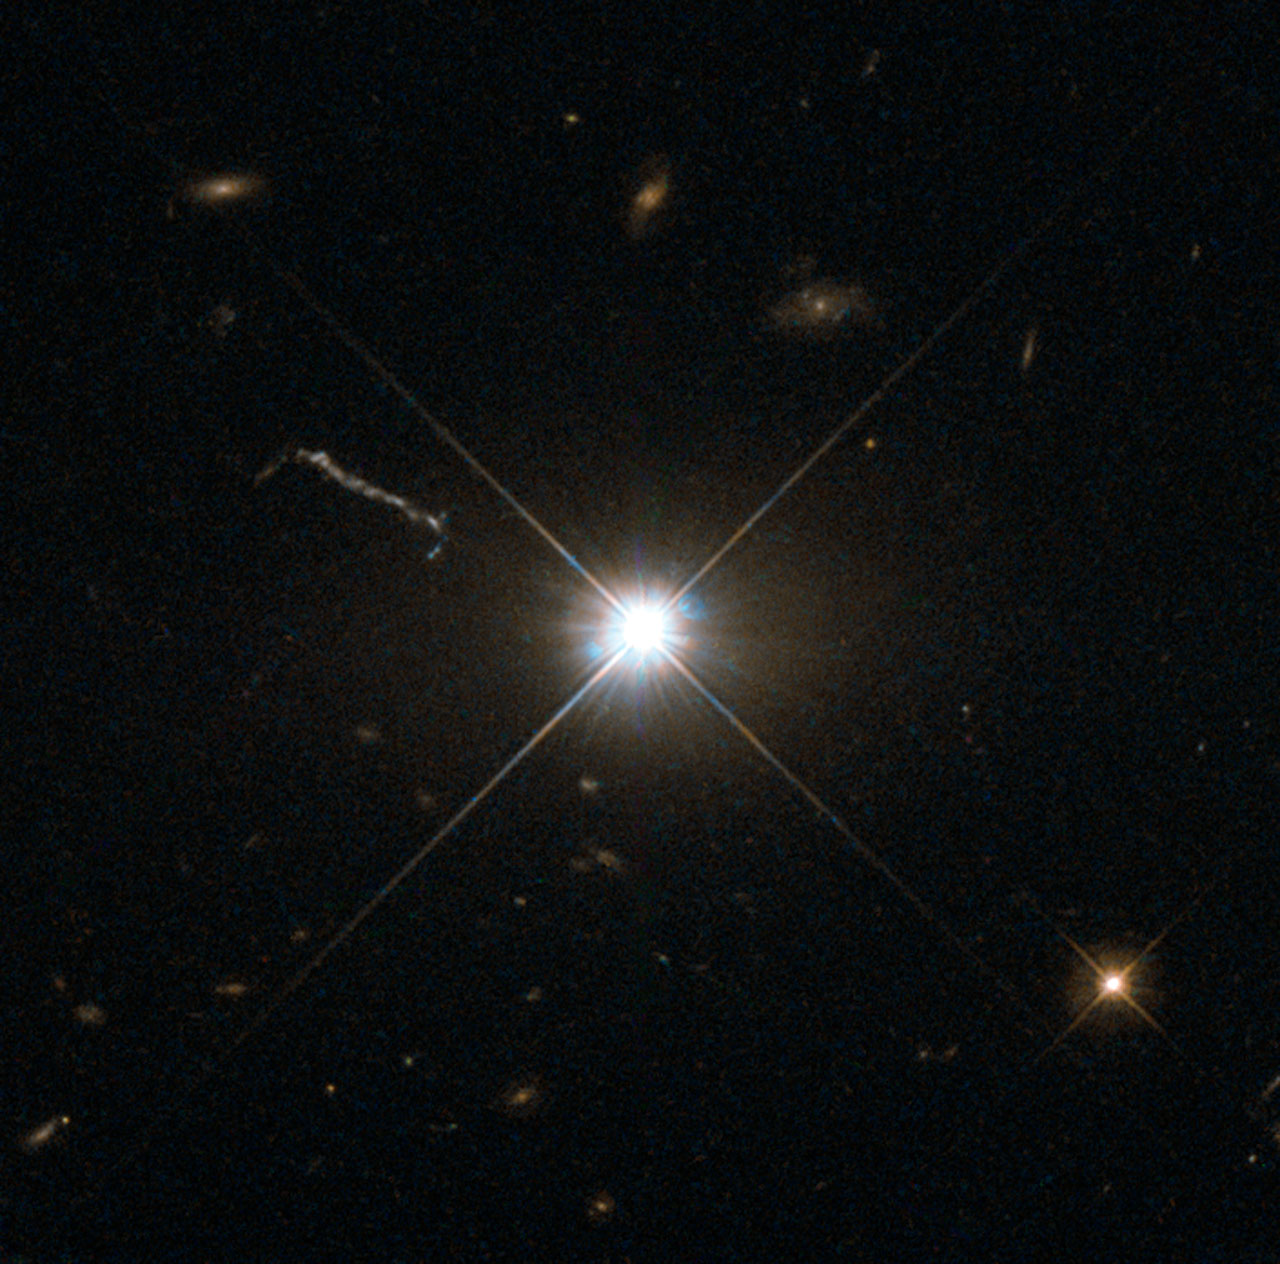 A picture of a far away quasar, shown as a bright point of light in the center of the picture.